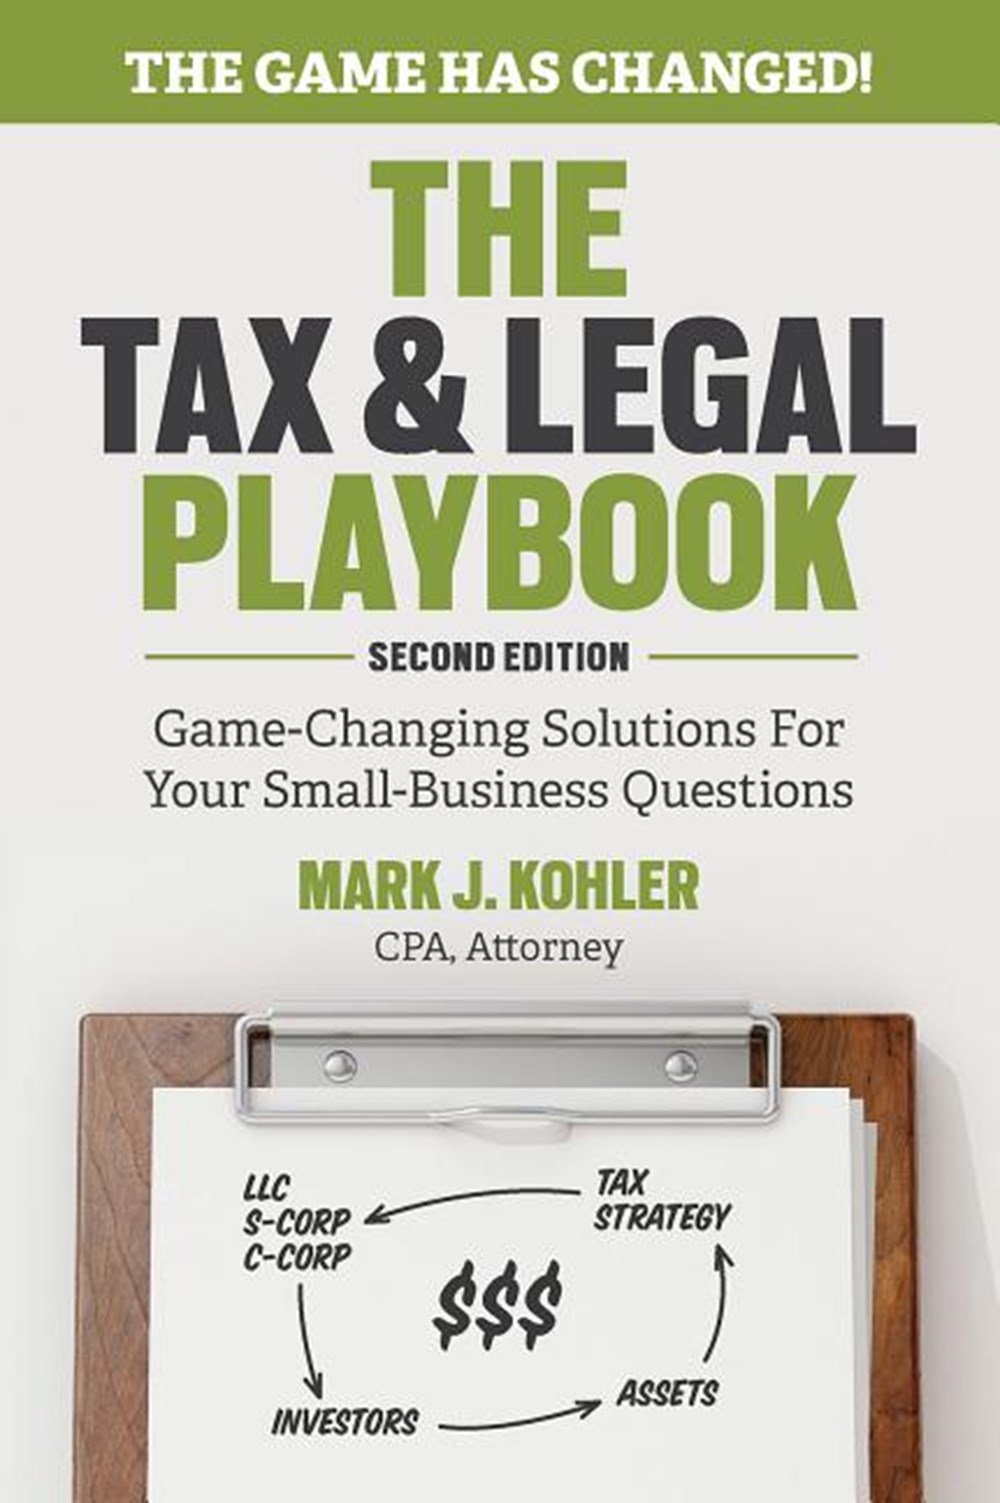 Tax and Legal Playbook Game-Changing Solutions to Your Small Business Questions